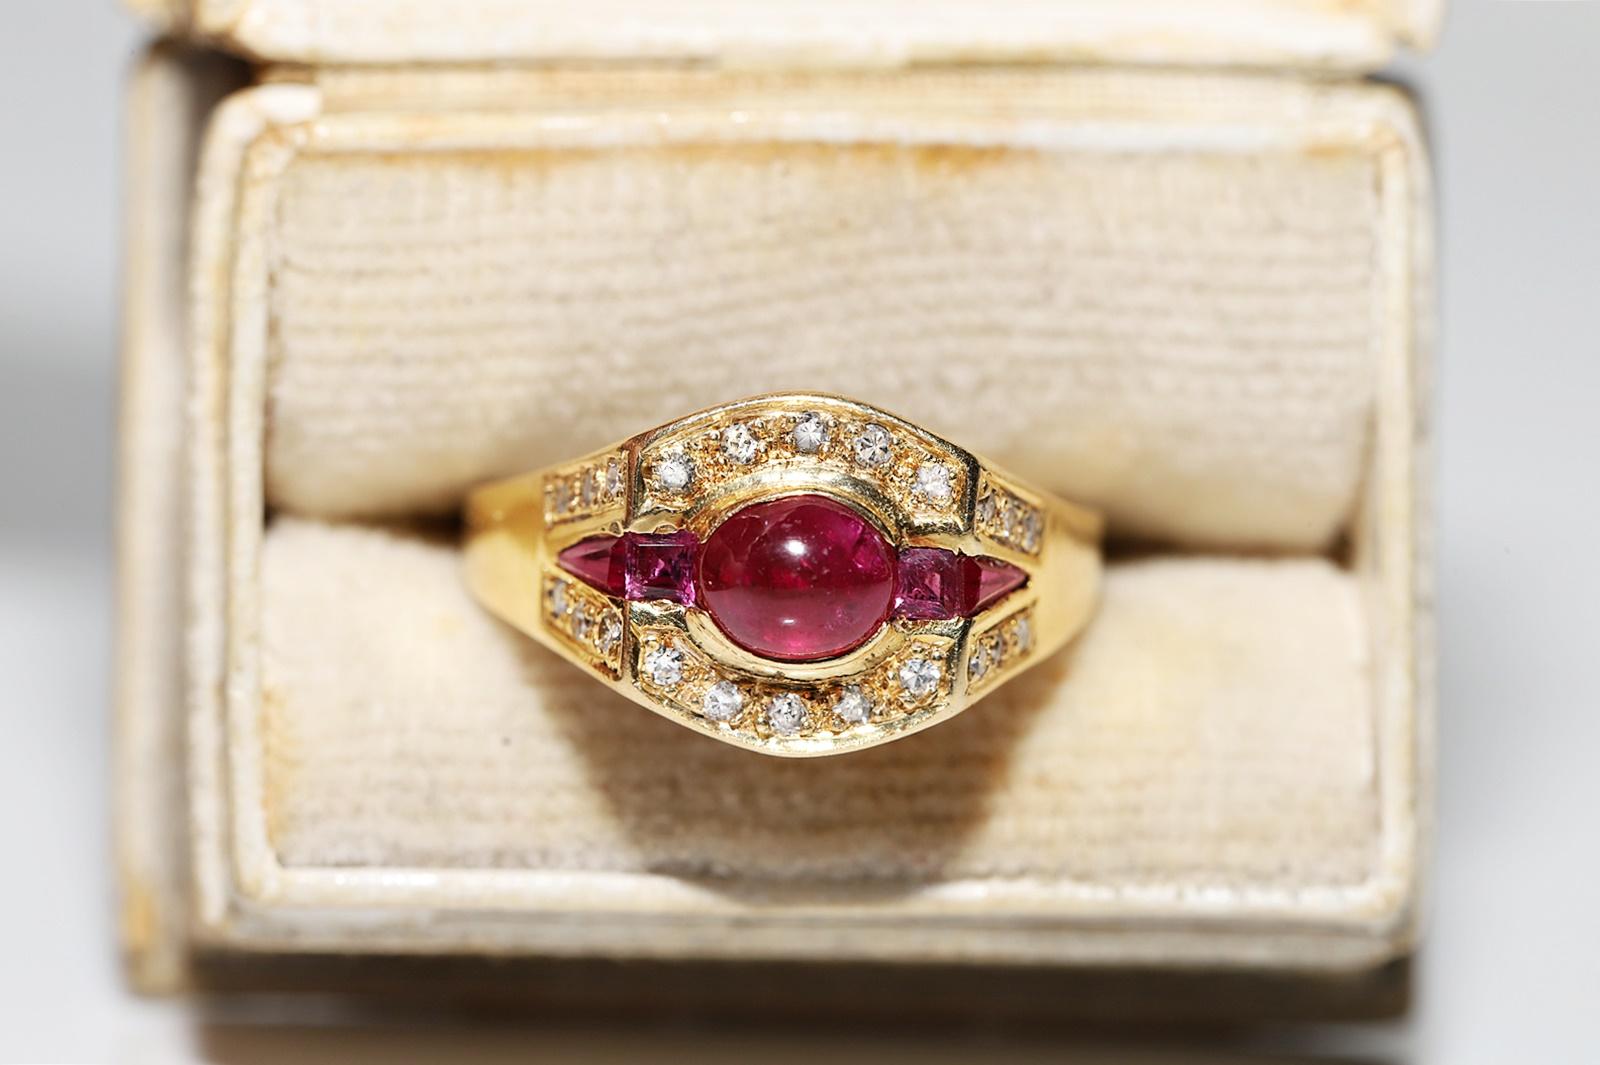 In very good condition.
Total weight is 3.4 grams.
Totally is diamond 0.20 ct.
The diamond is has H color and vs-s1 clarity.
Totally is ruby 1 ct.
Ring size is US 6 (We offer free resizing)
We can make any size.
Box is not included.
Please contact